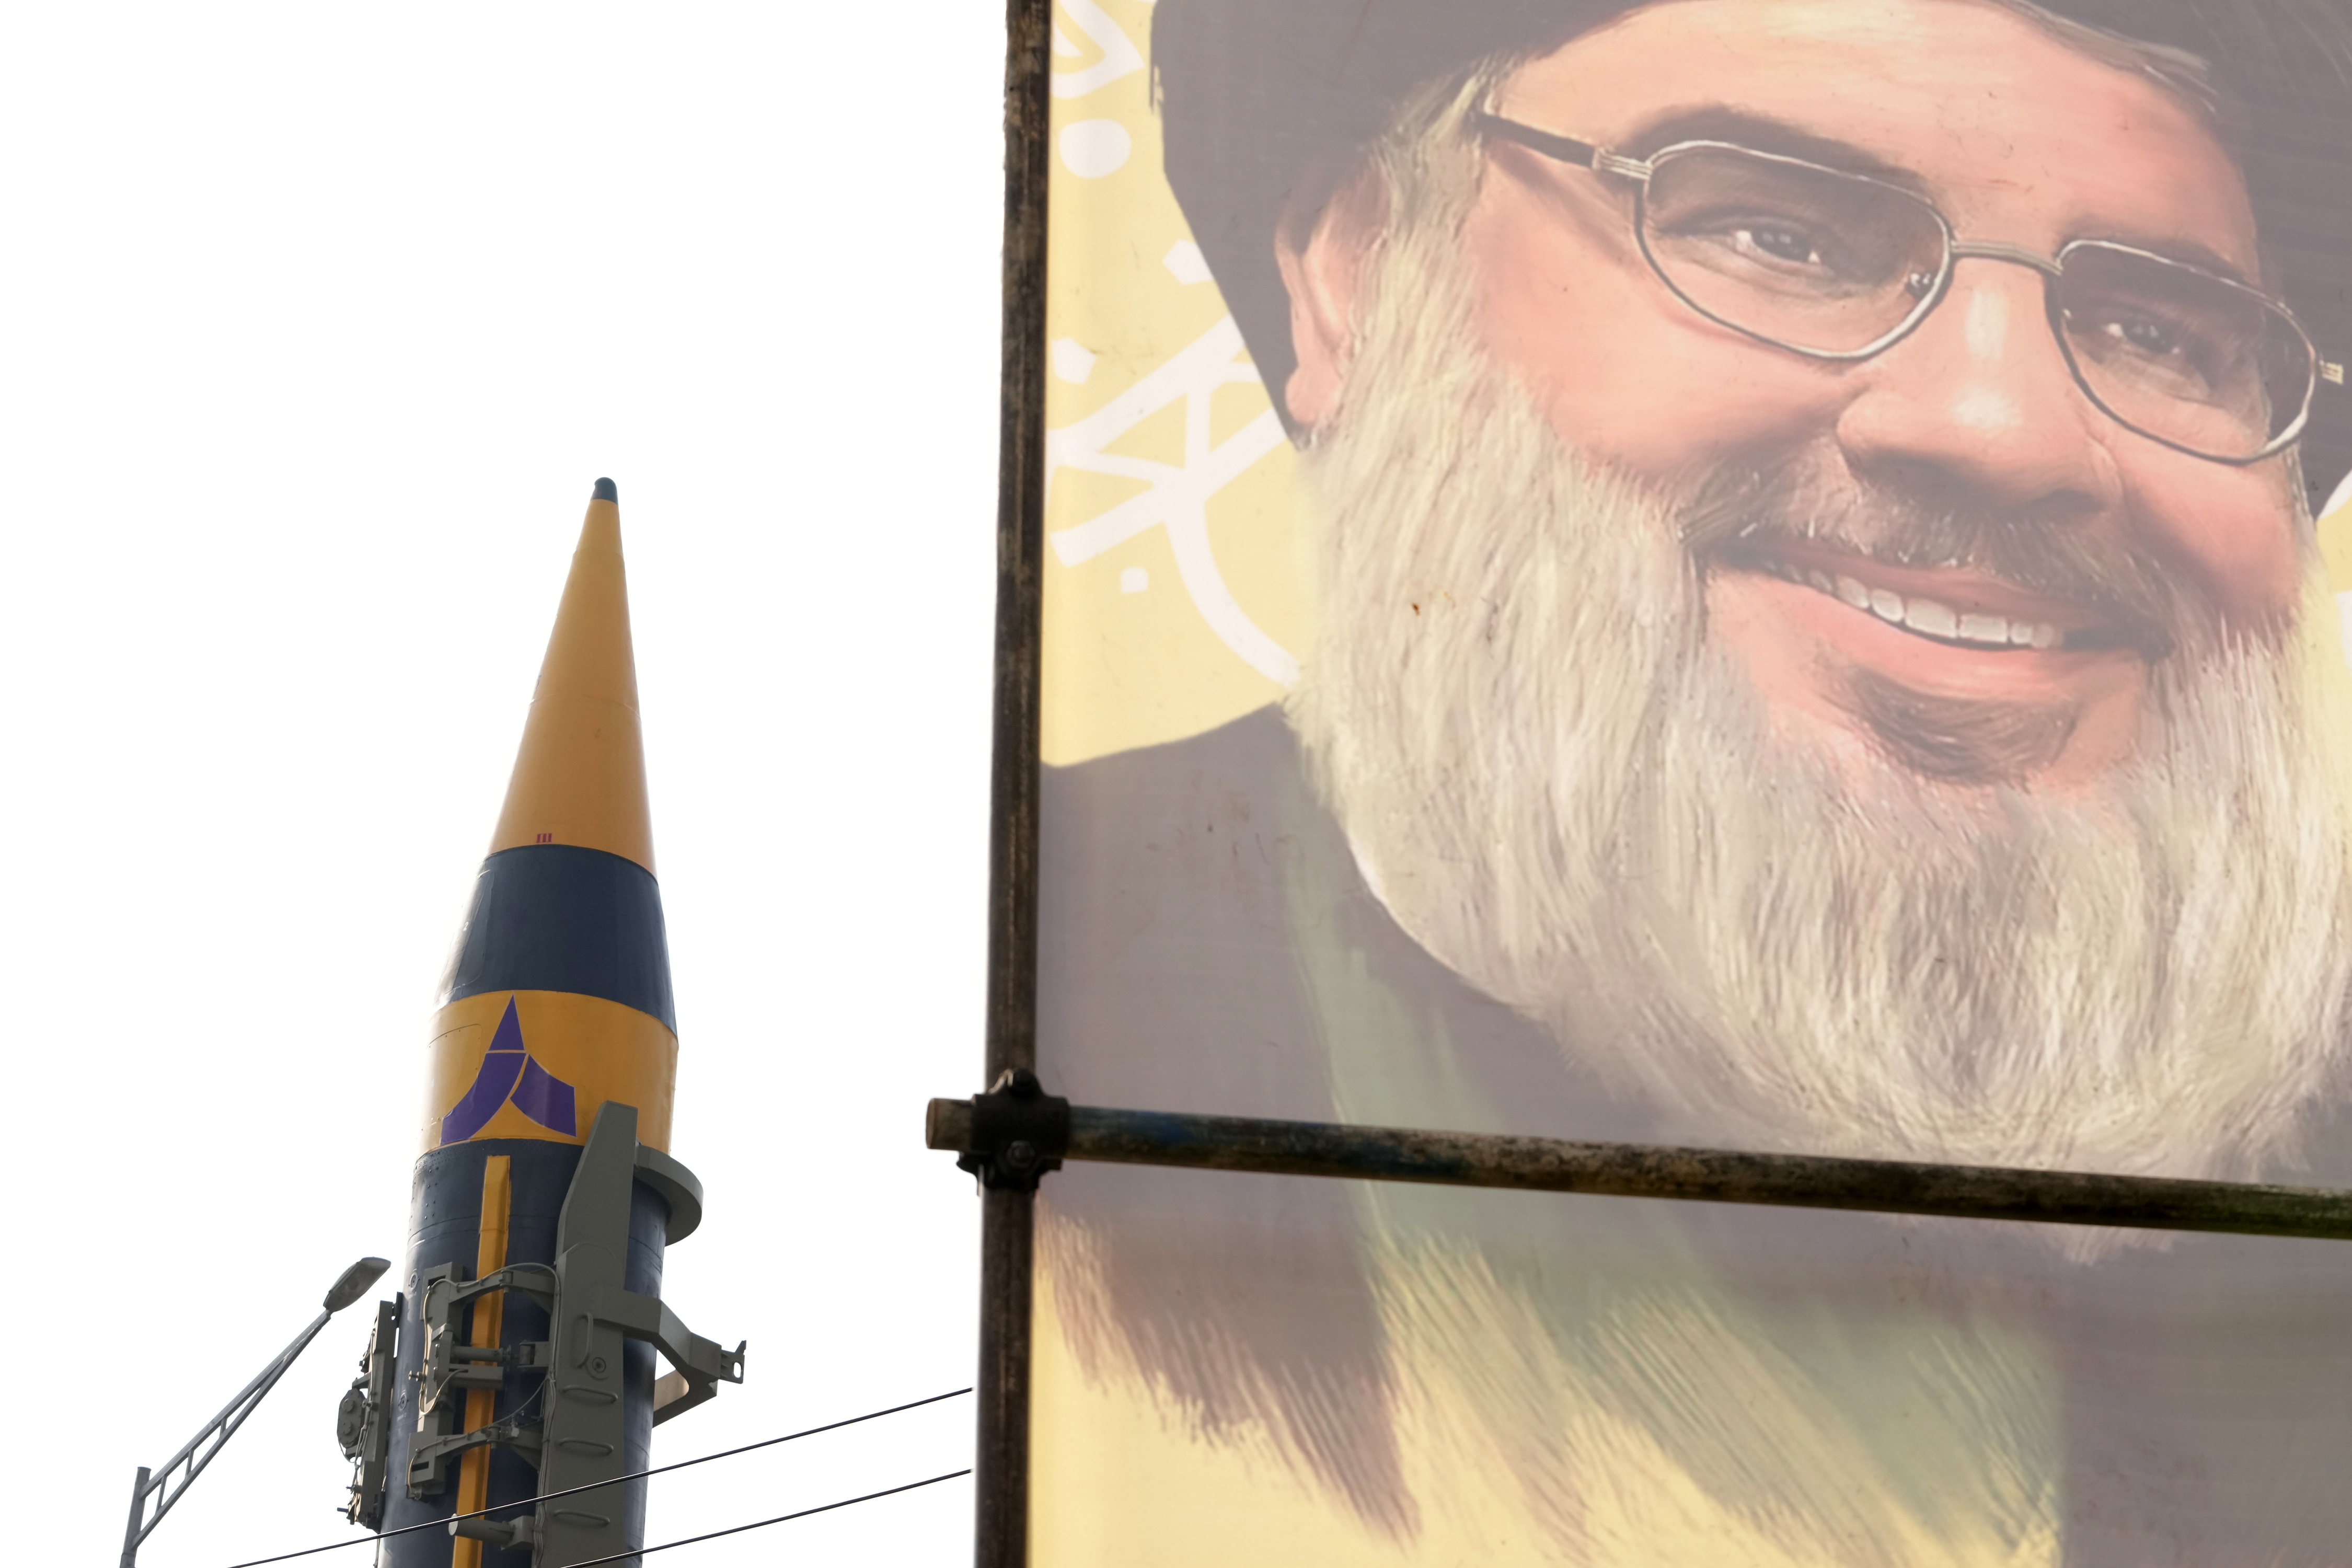 Day 205 - As Hezbollah rattles sabers, what are its capabilities?